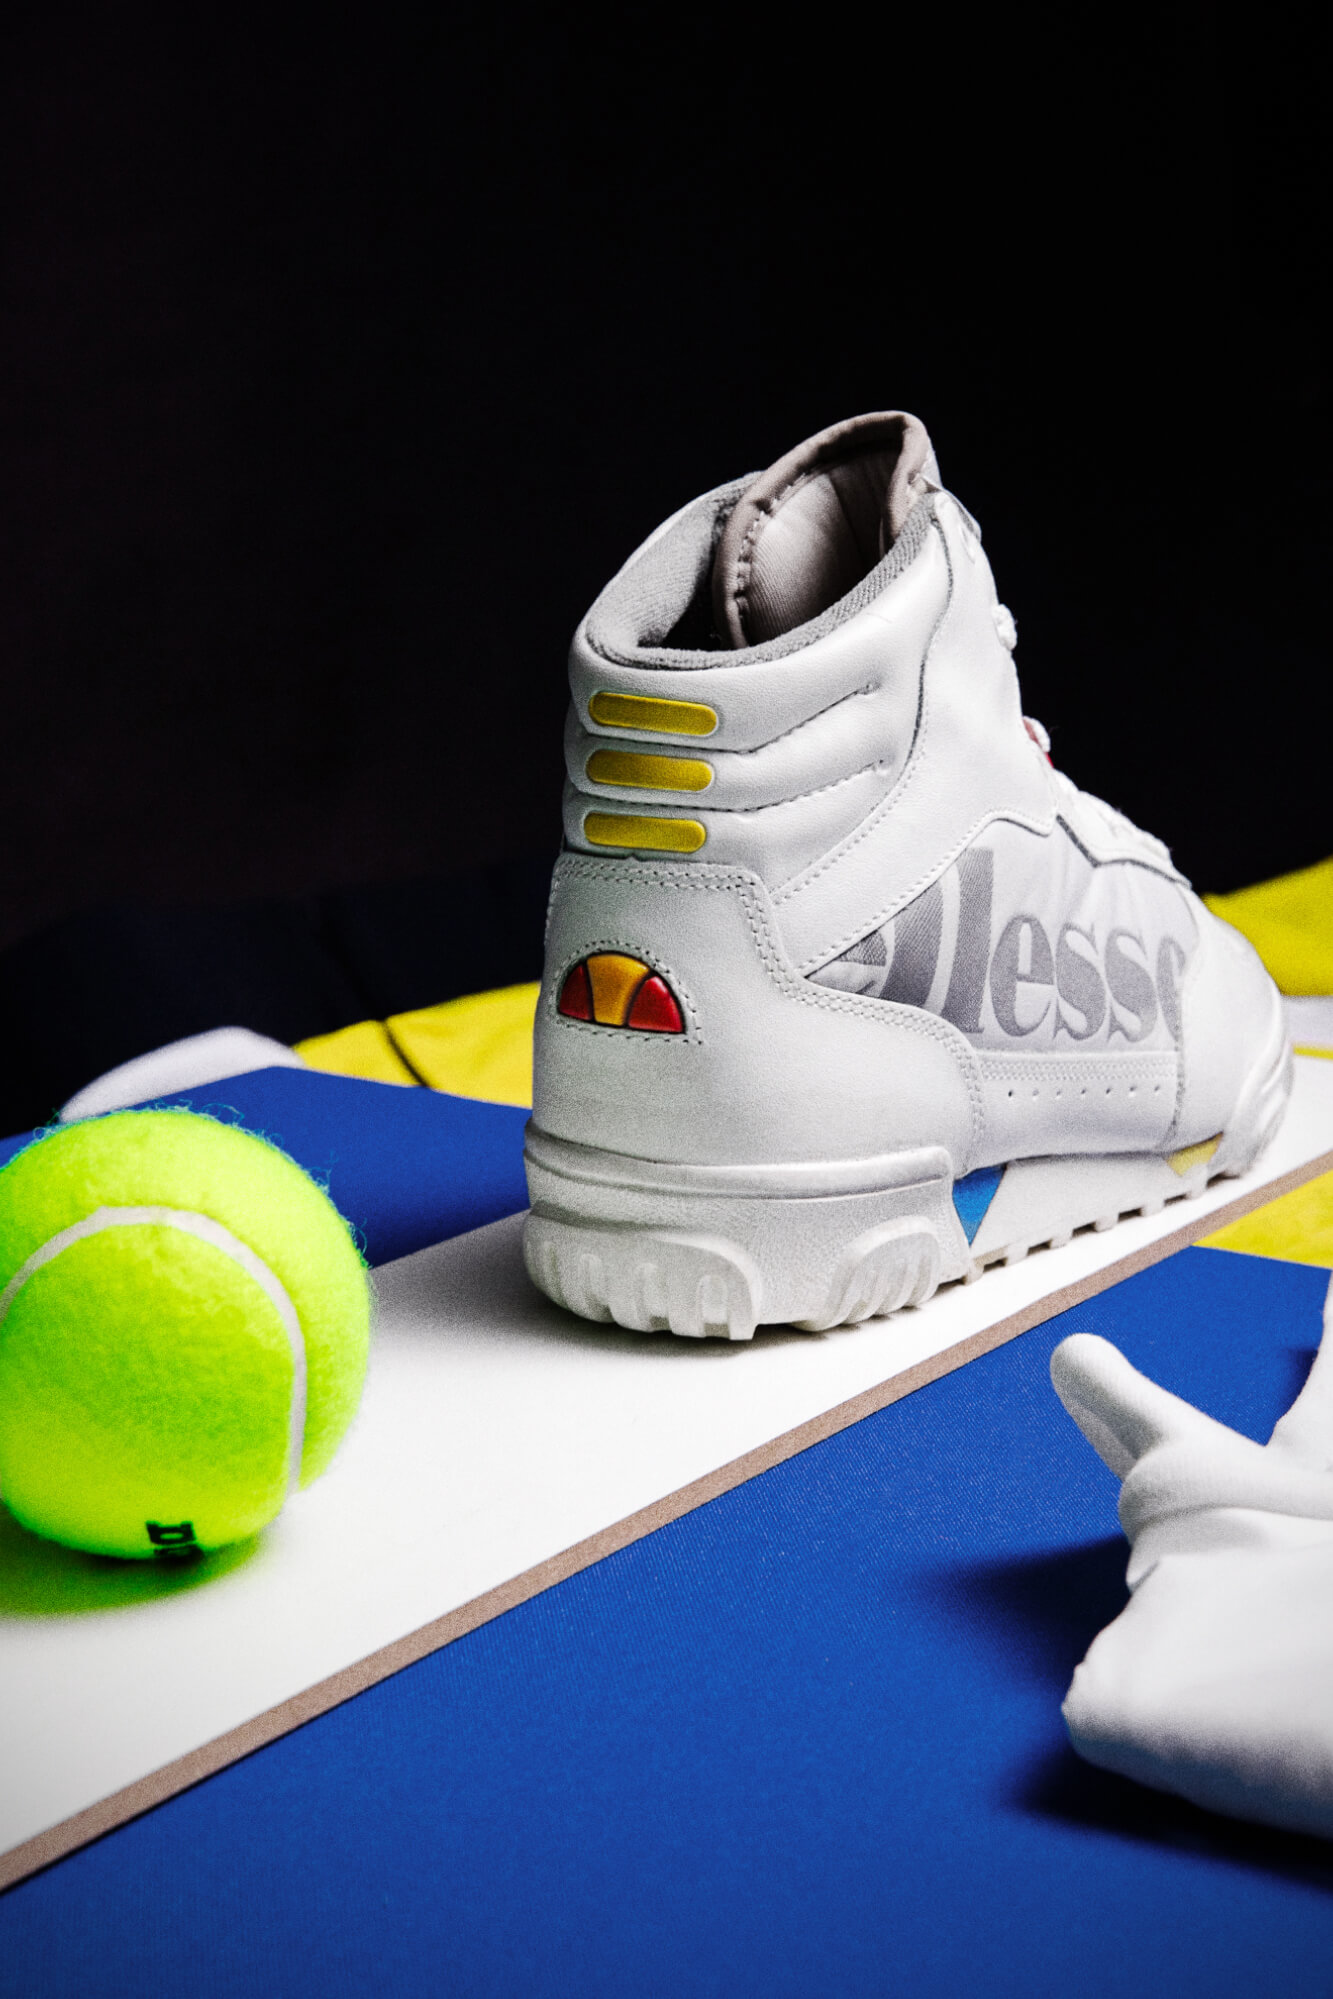 Injusto Incontable rápido From One Small Tailor to Global Fashion Brand: The ellesse Story